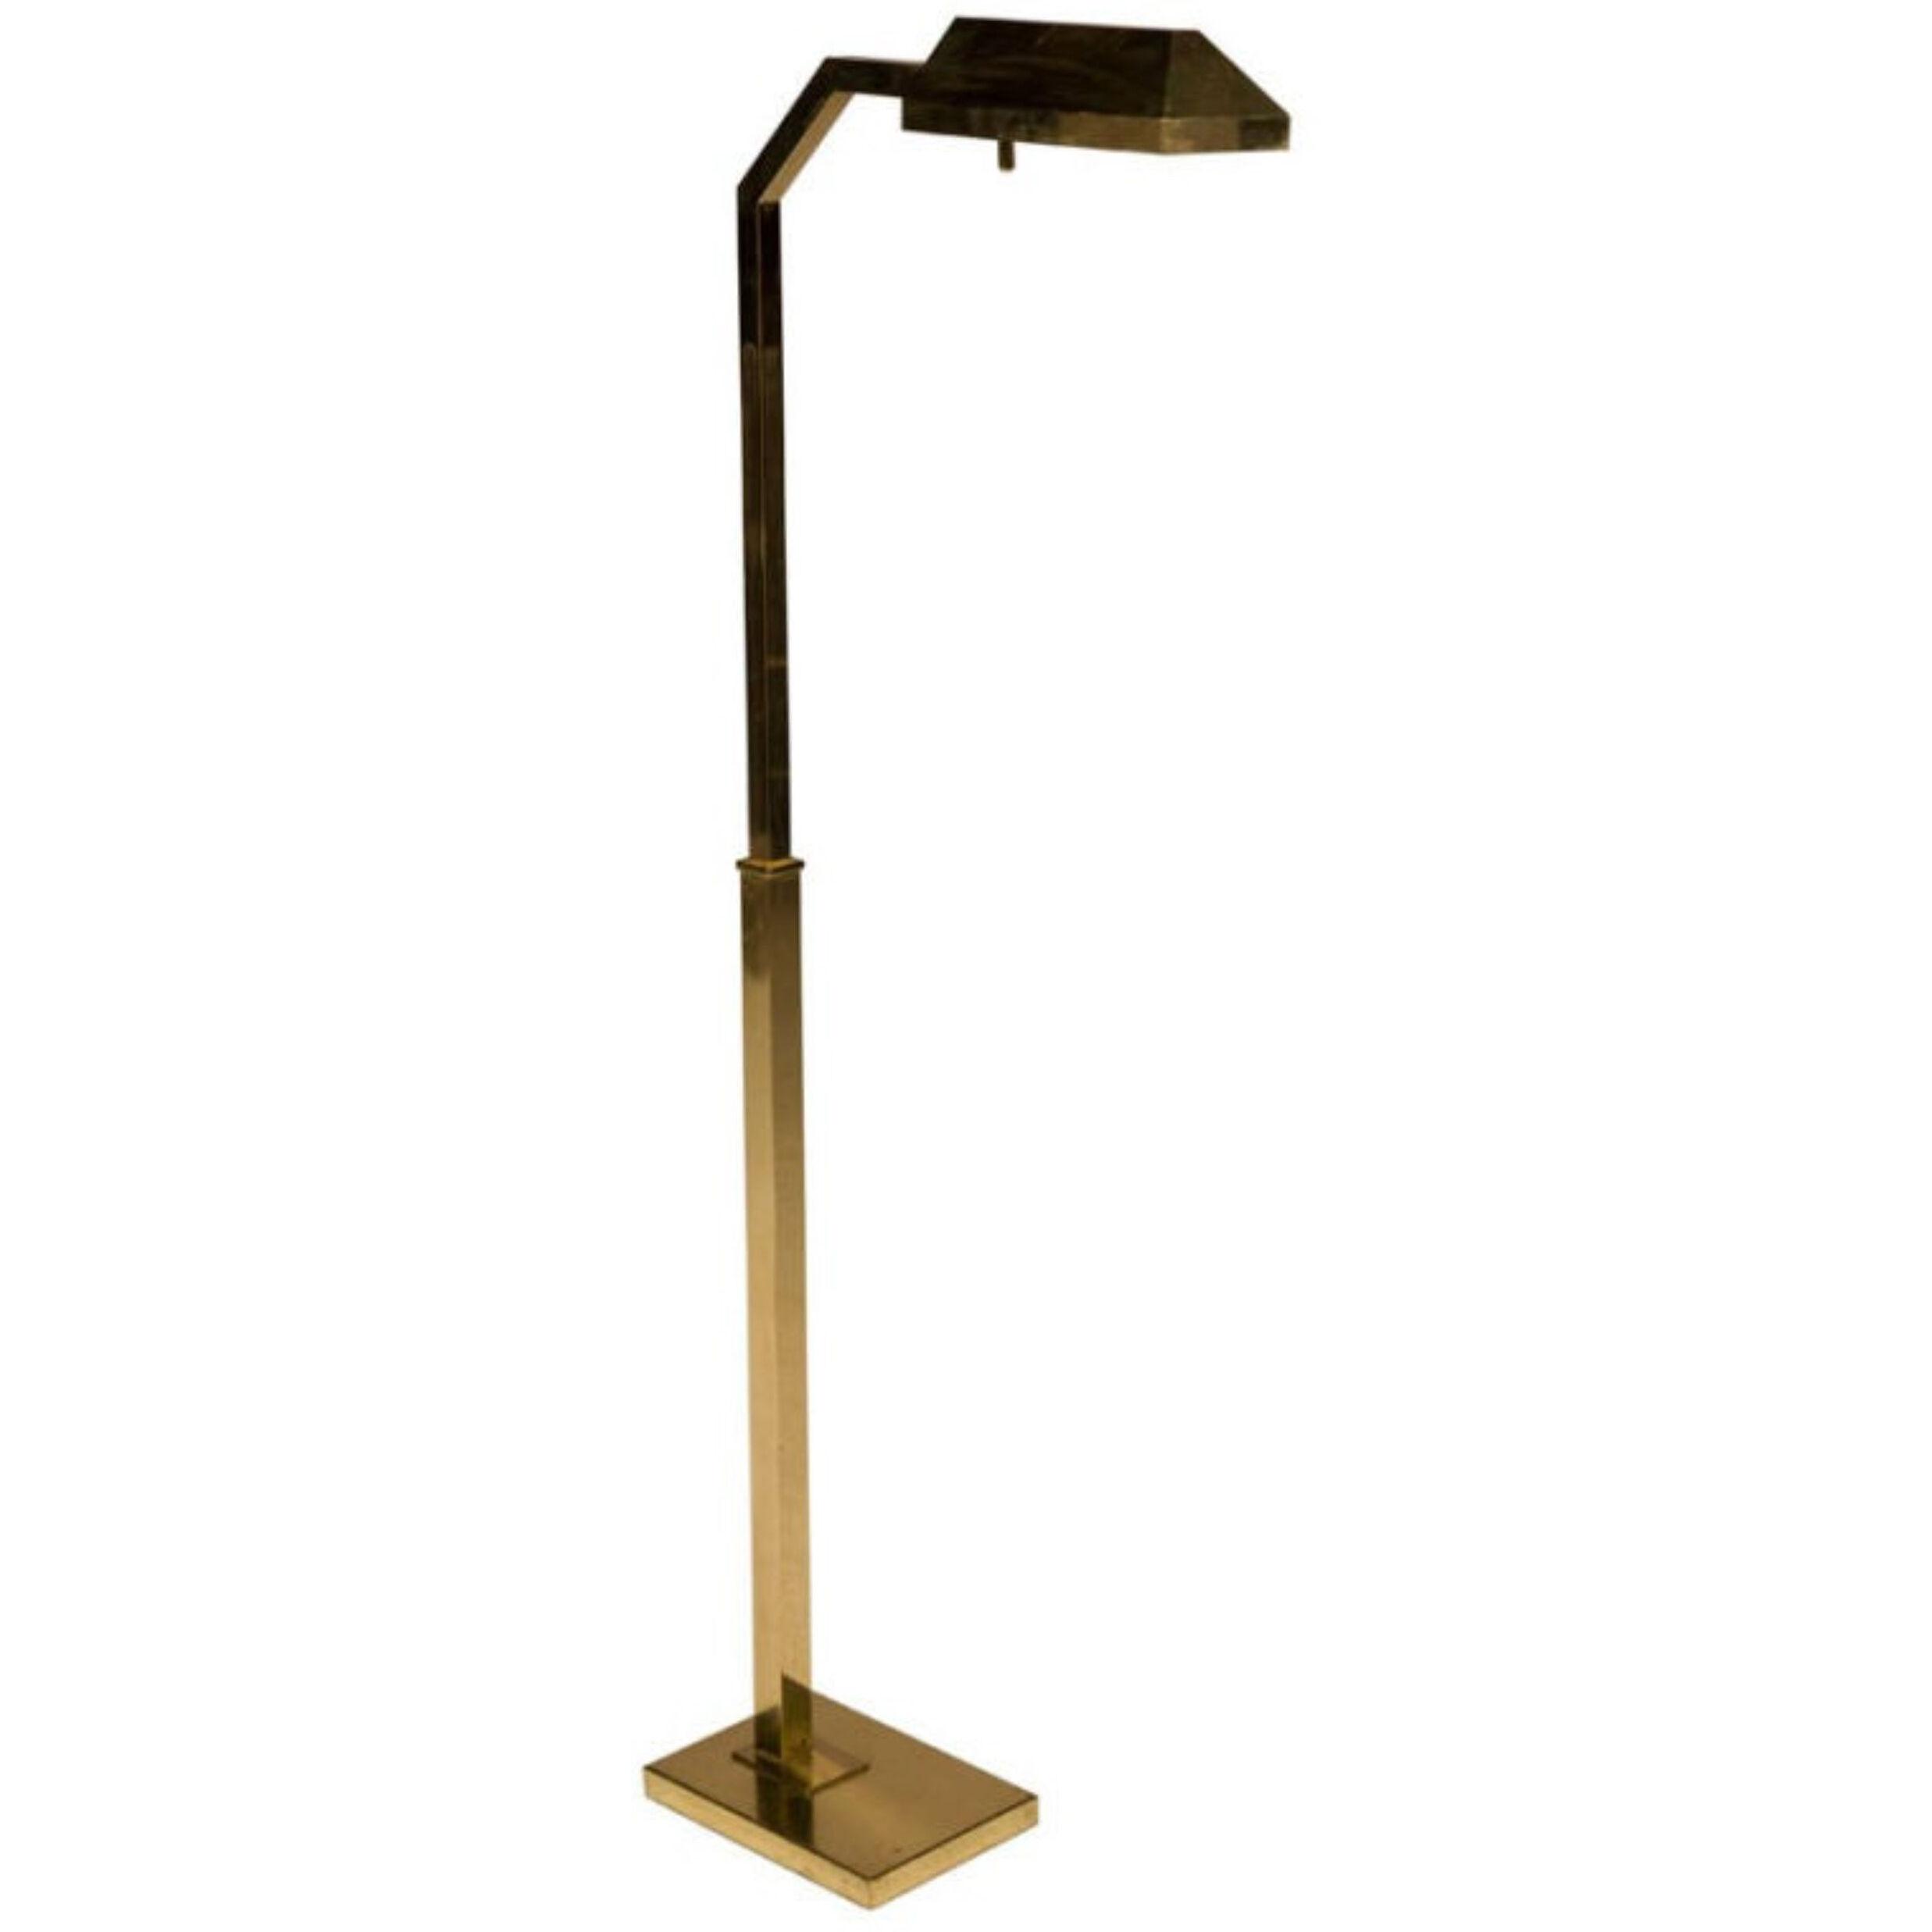 Polished Brass Adjustable Floor Reading Lamp by Chapman